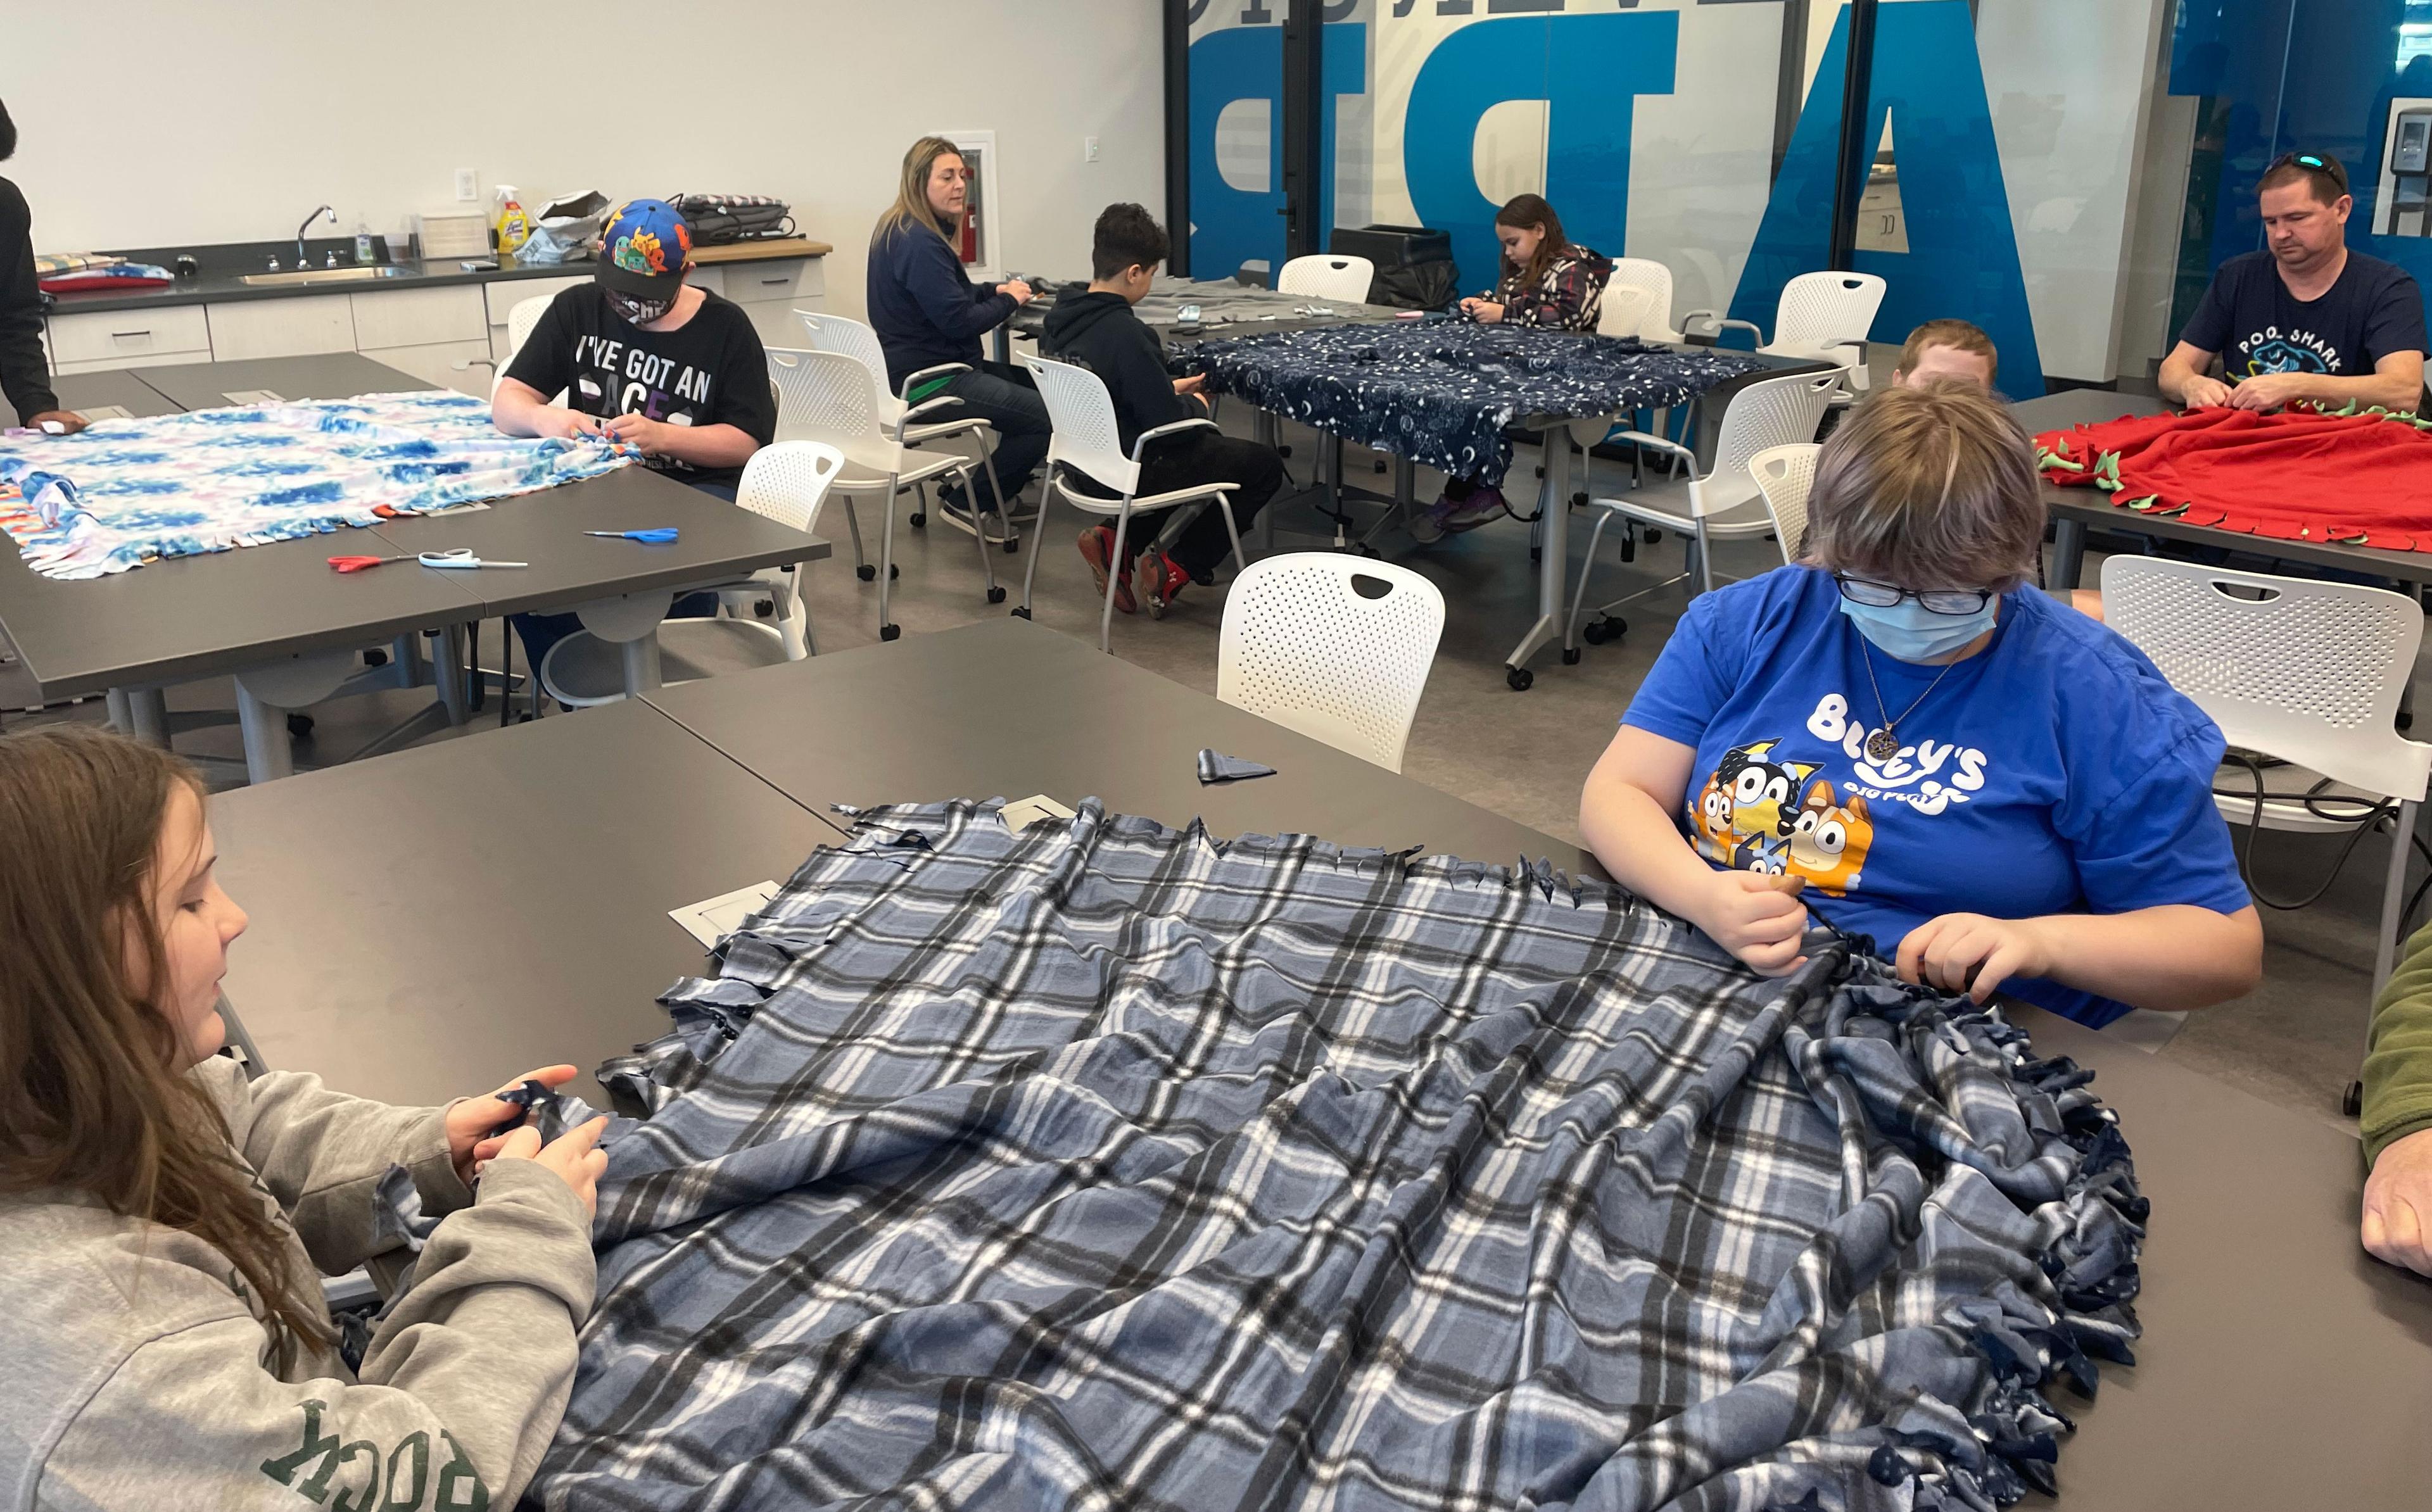 Two students work on a no-sew blanket for a homeless shelter